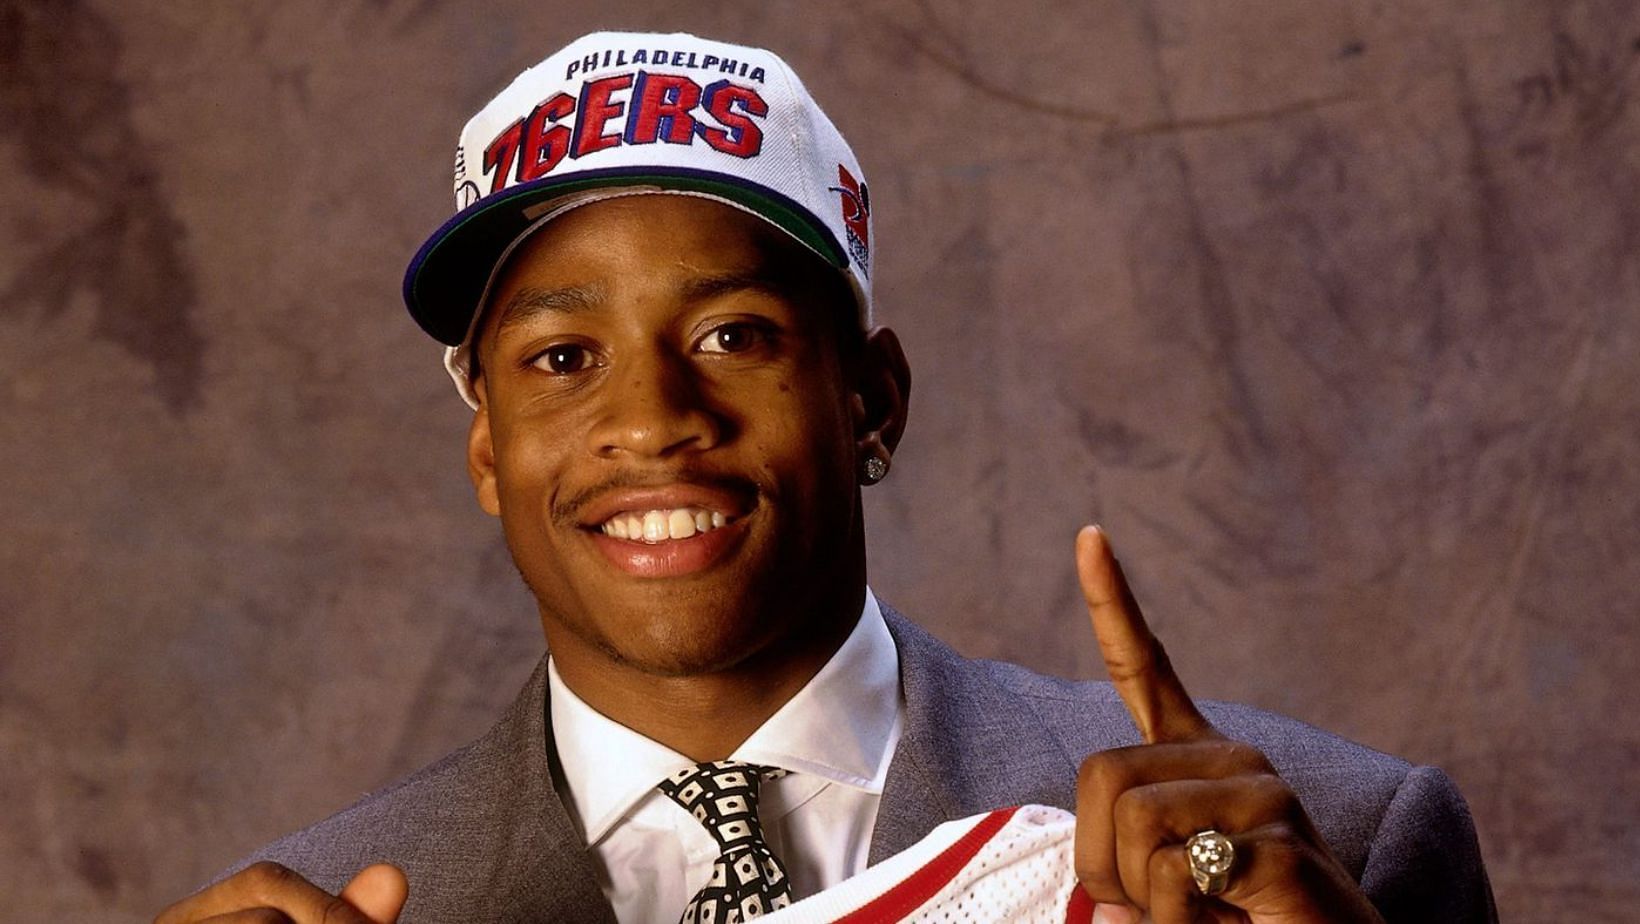 Allen Iverson, drafted No. 1 by the Philadelphia 76ers in 1996, is the shortest top pick in NBA draft history.